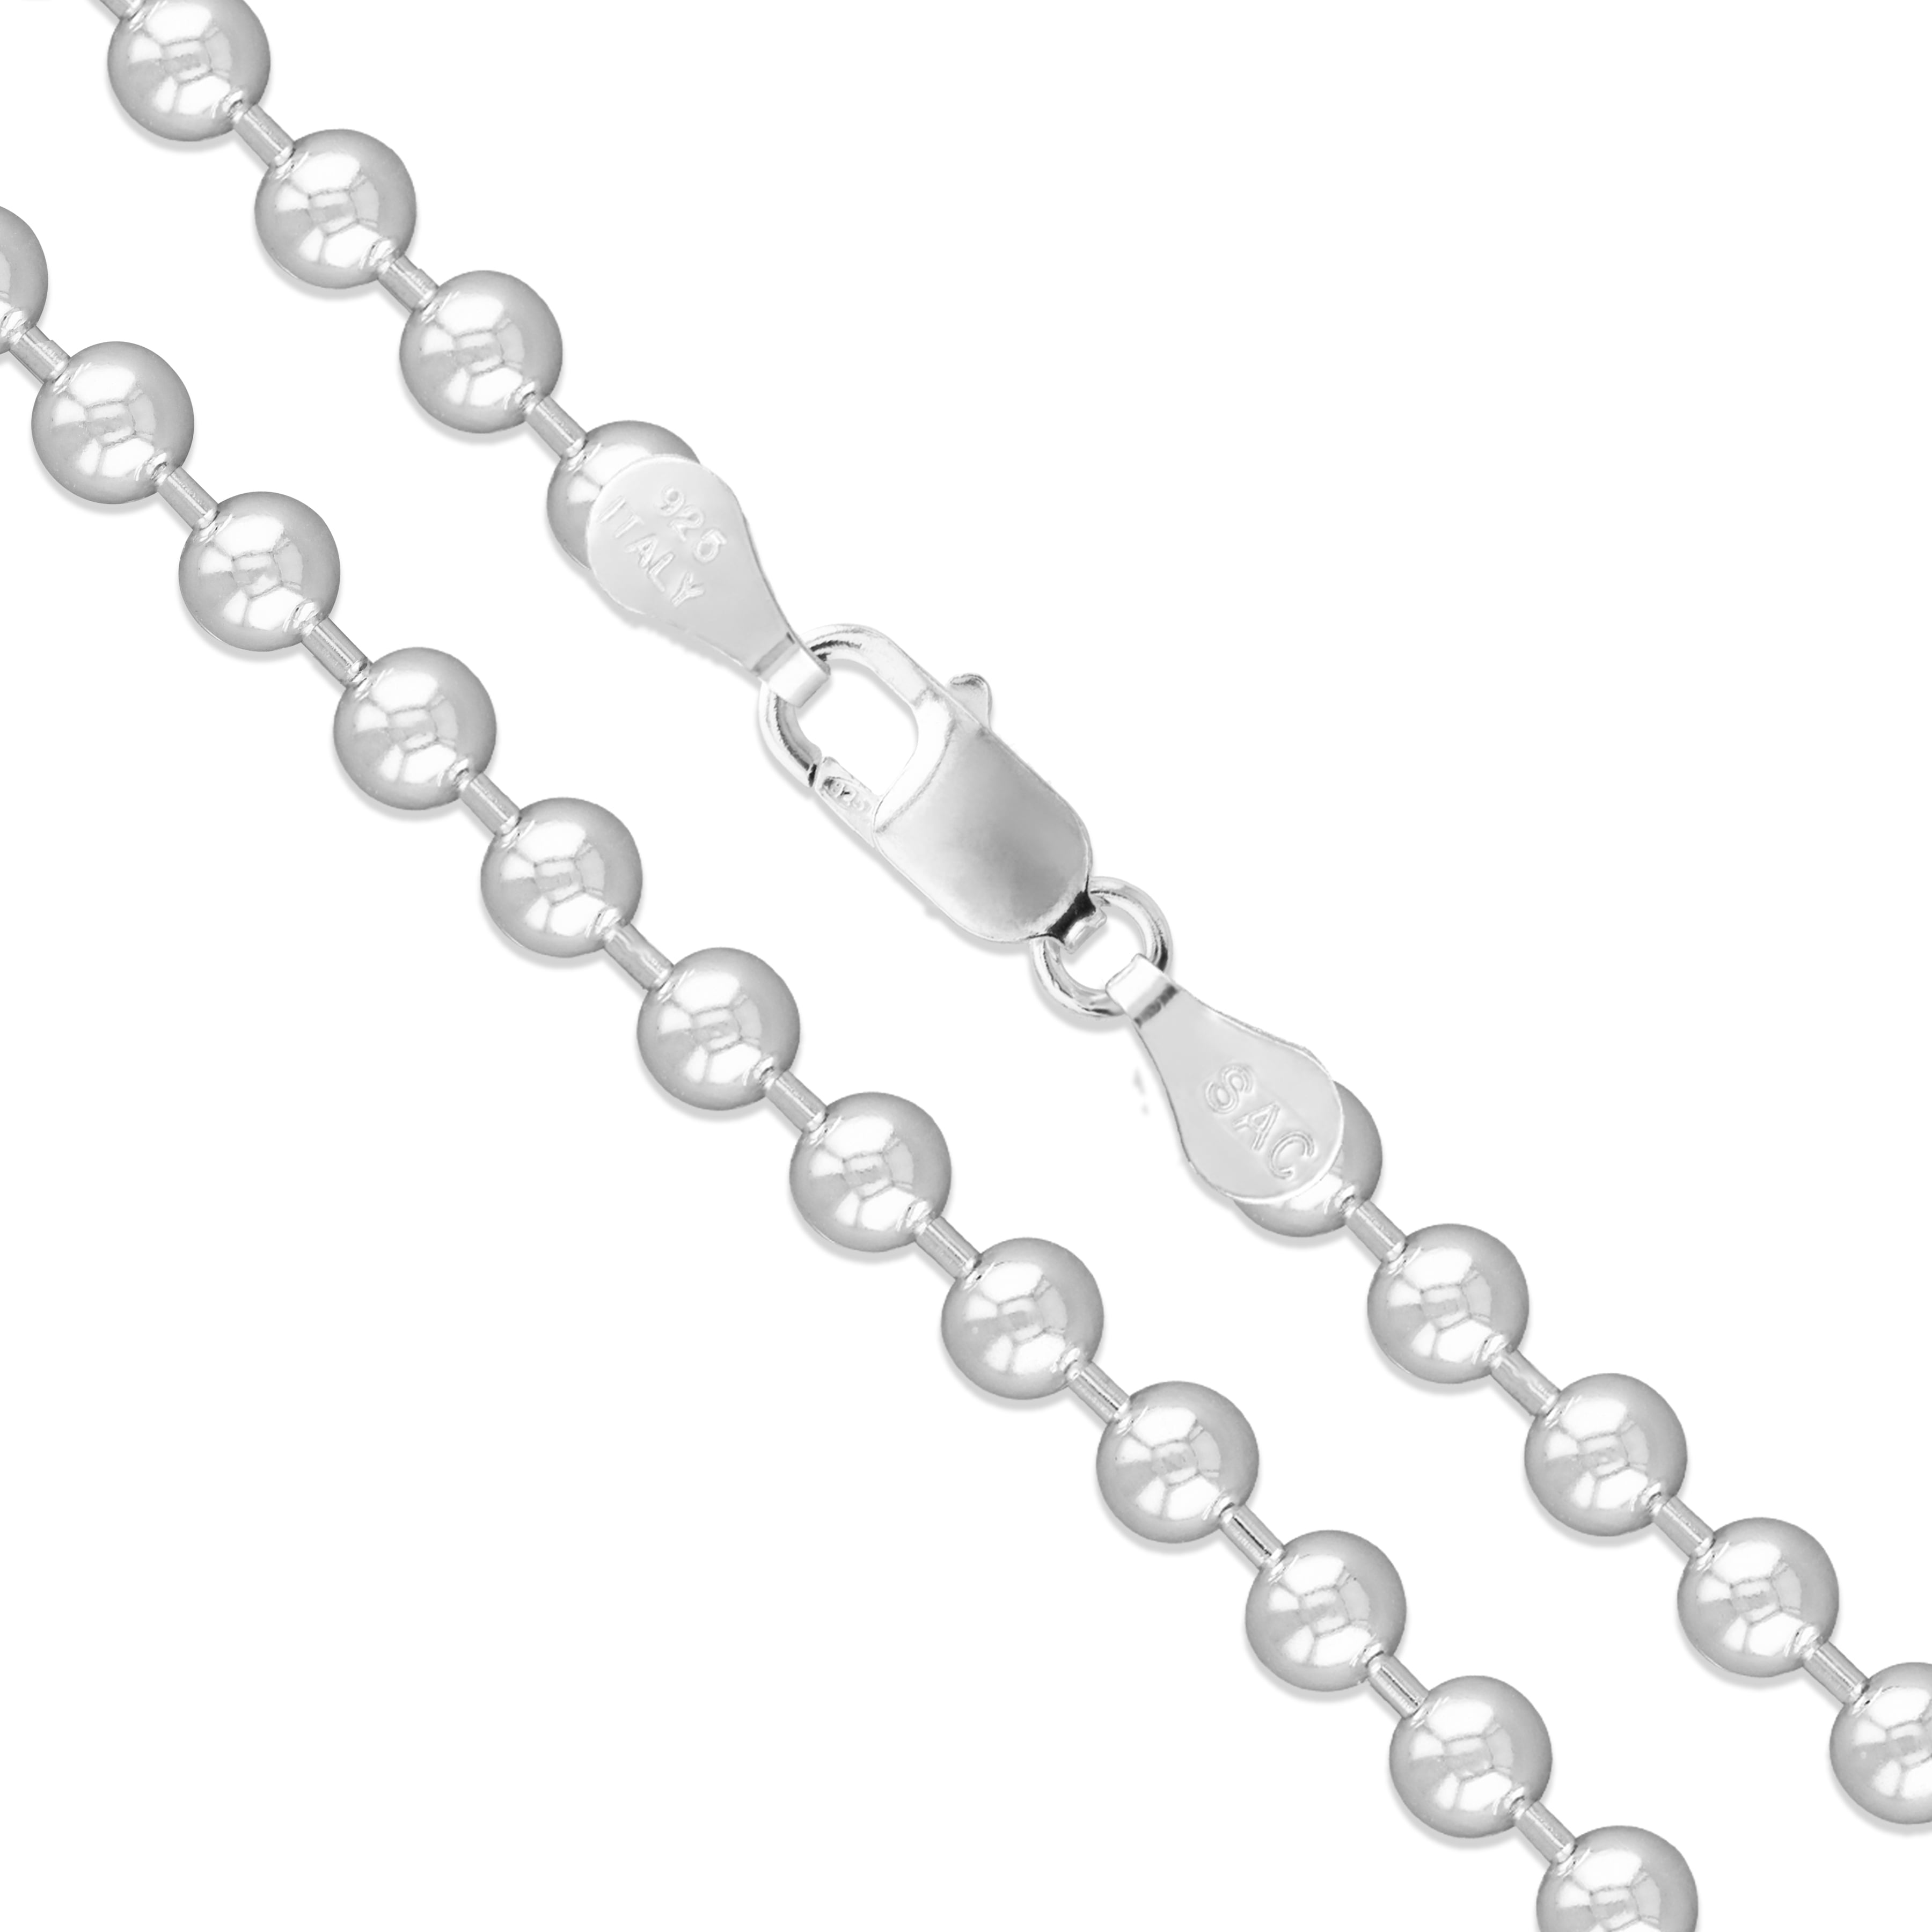 22 inch 14K White Gold 4mm Ball Chain Necklace